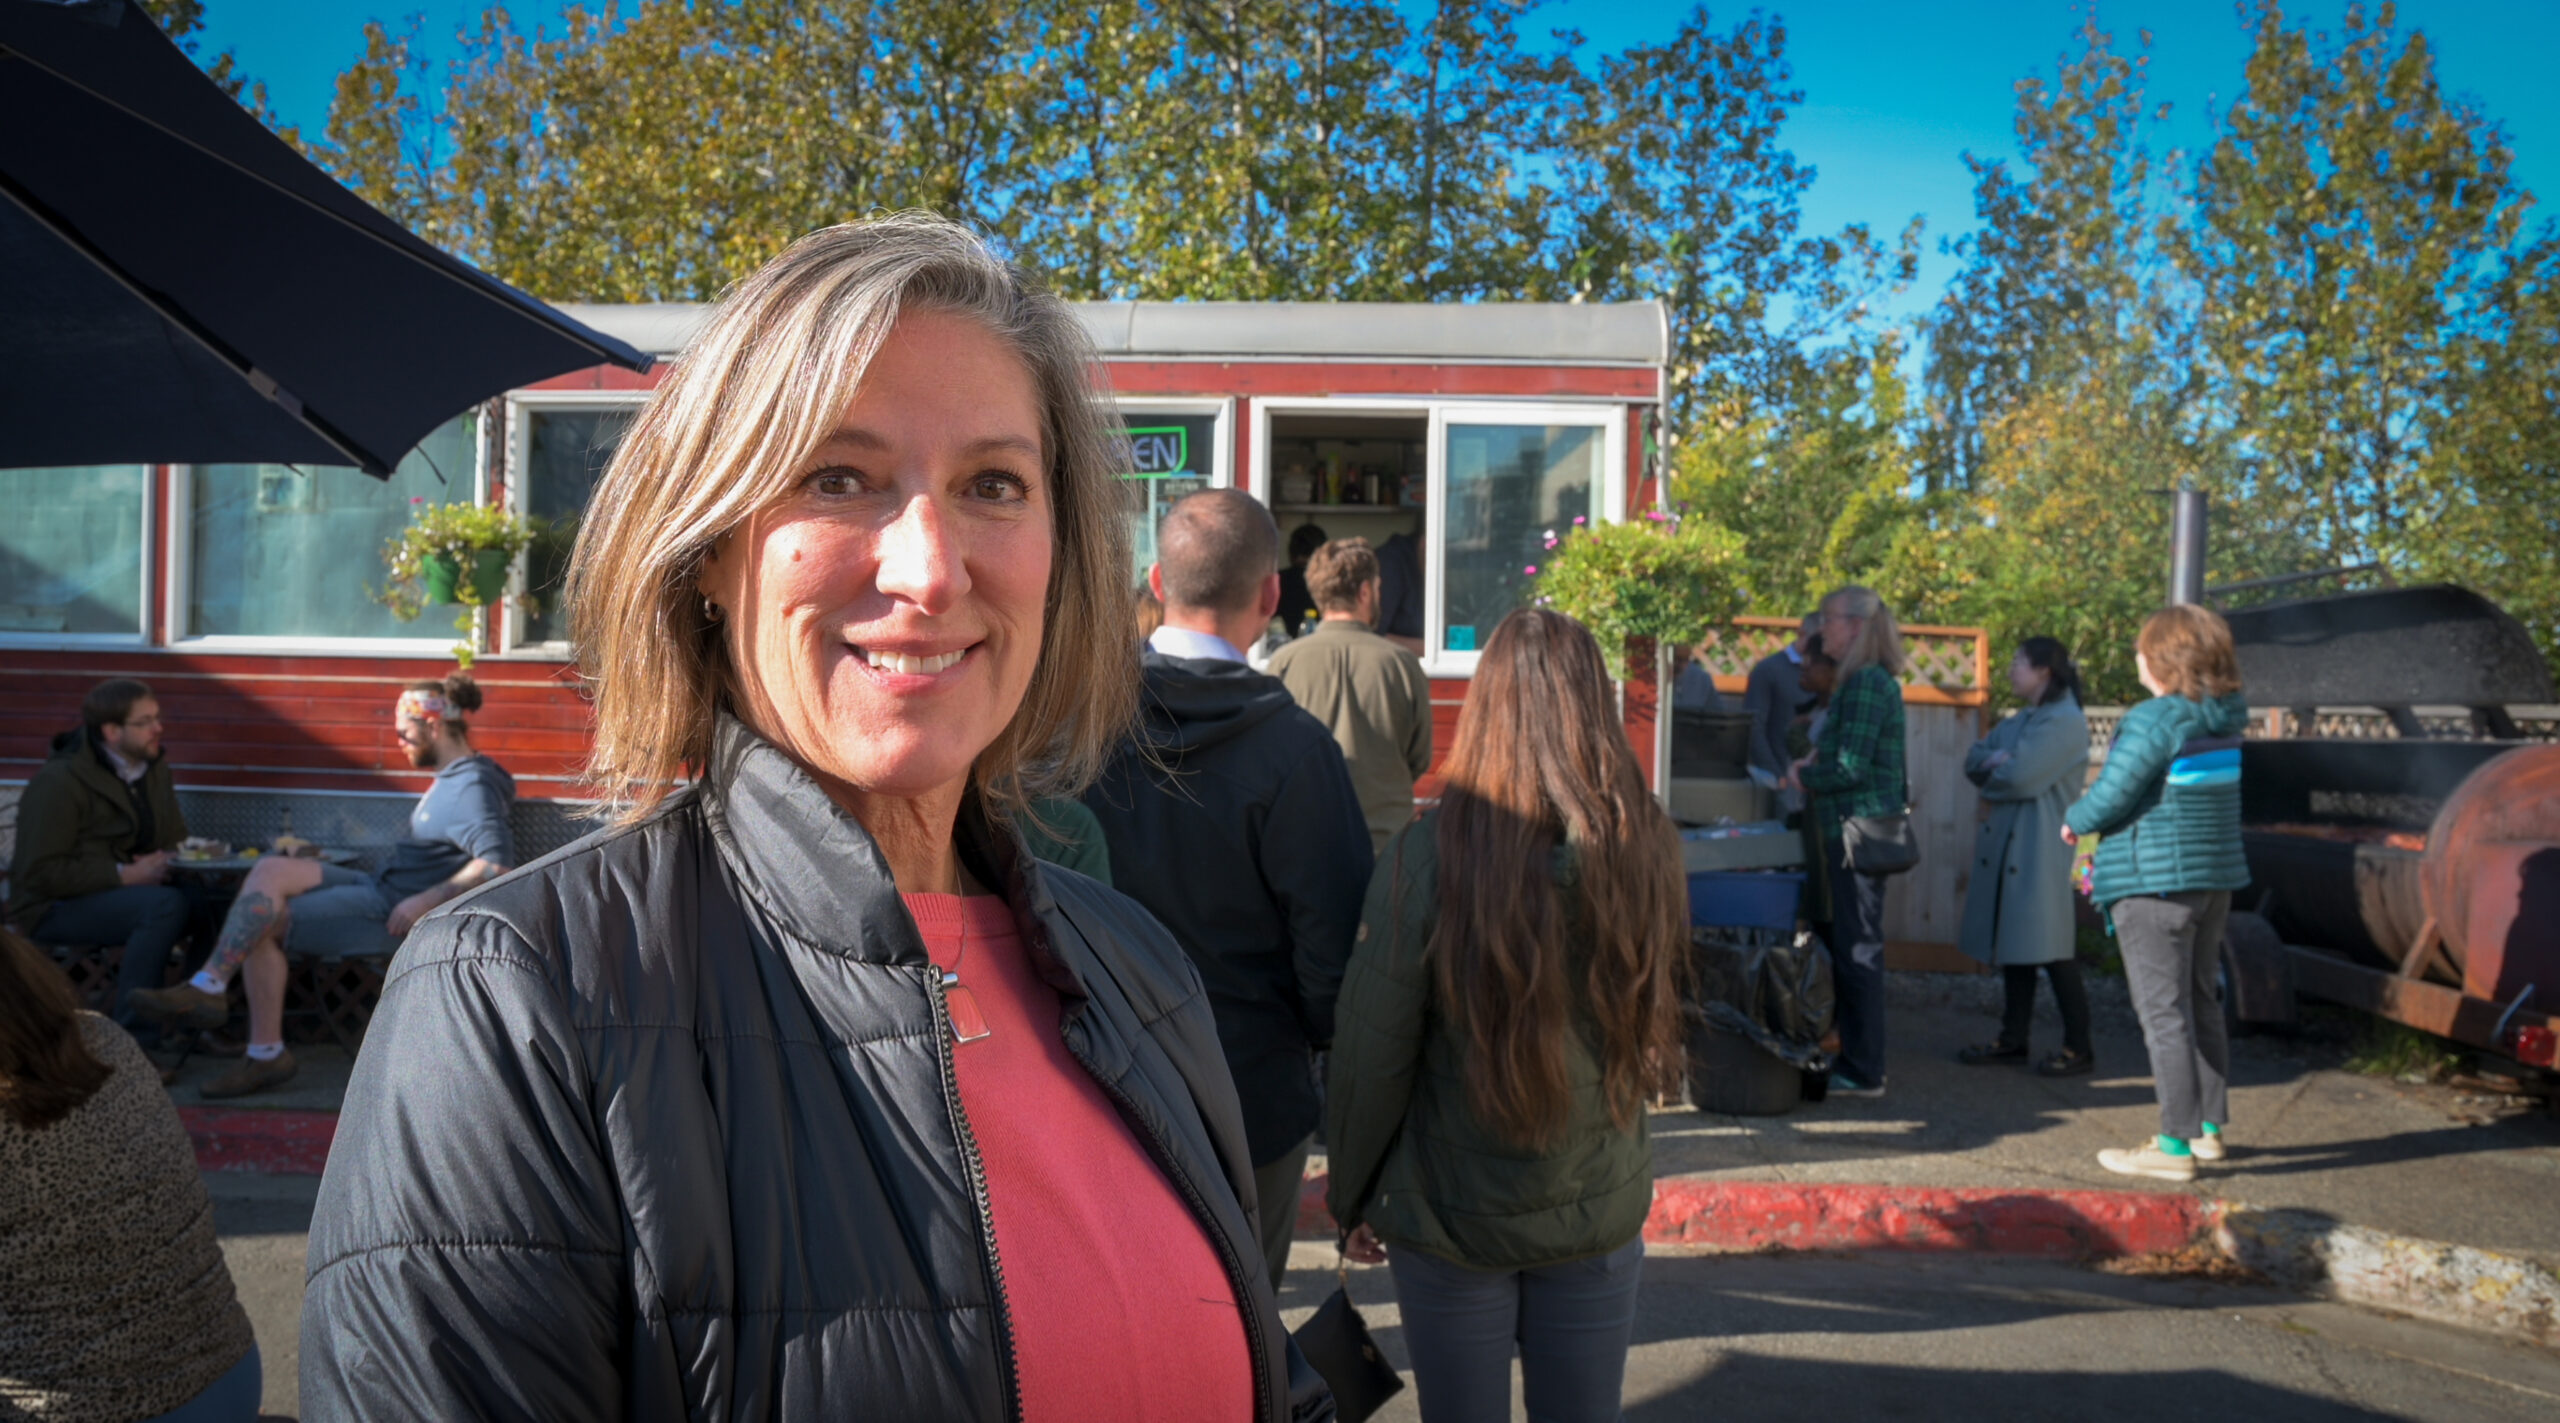 A woman in black puffy jacket outside a food truck.